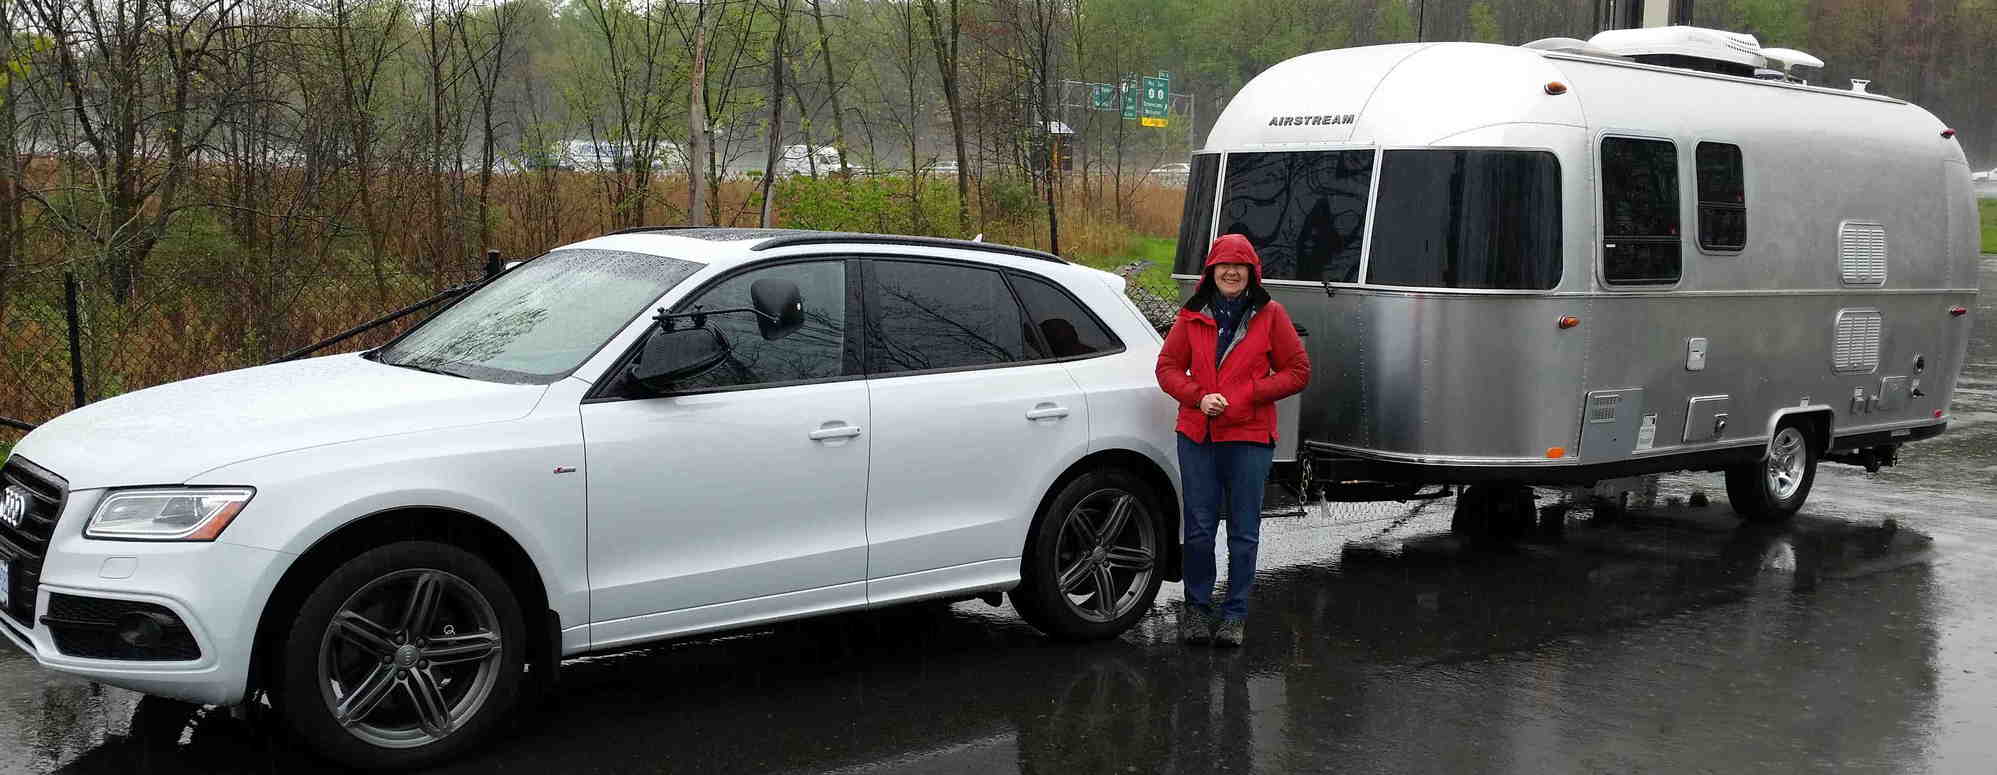 What's the real deal with towing near the max capacity with a Q5